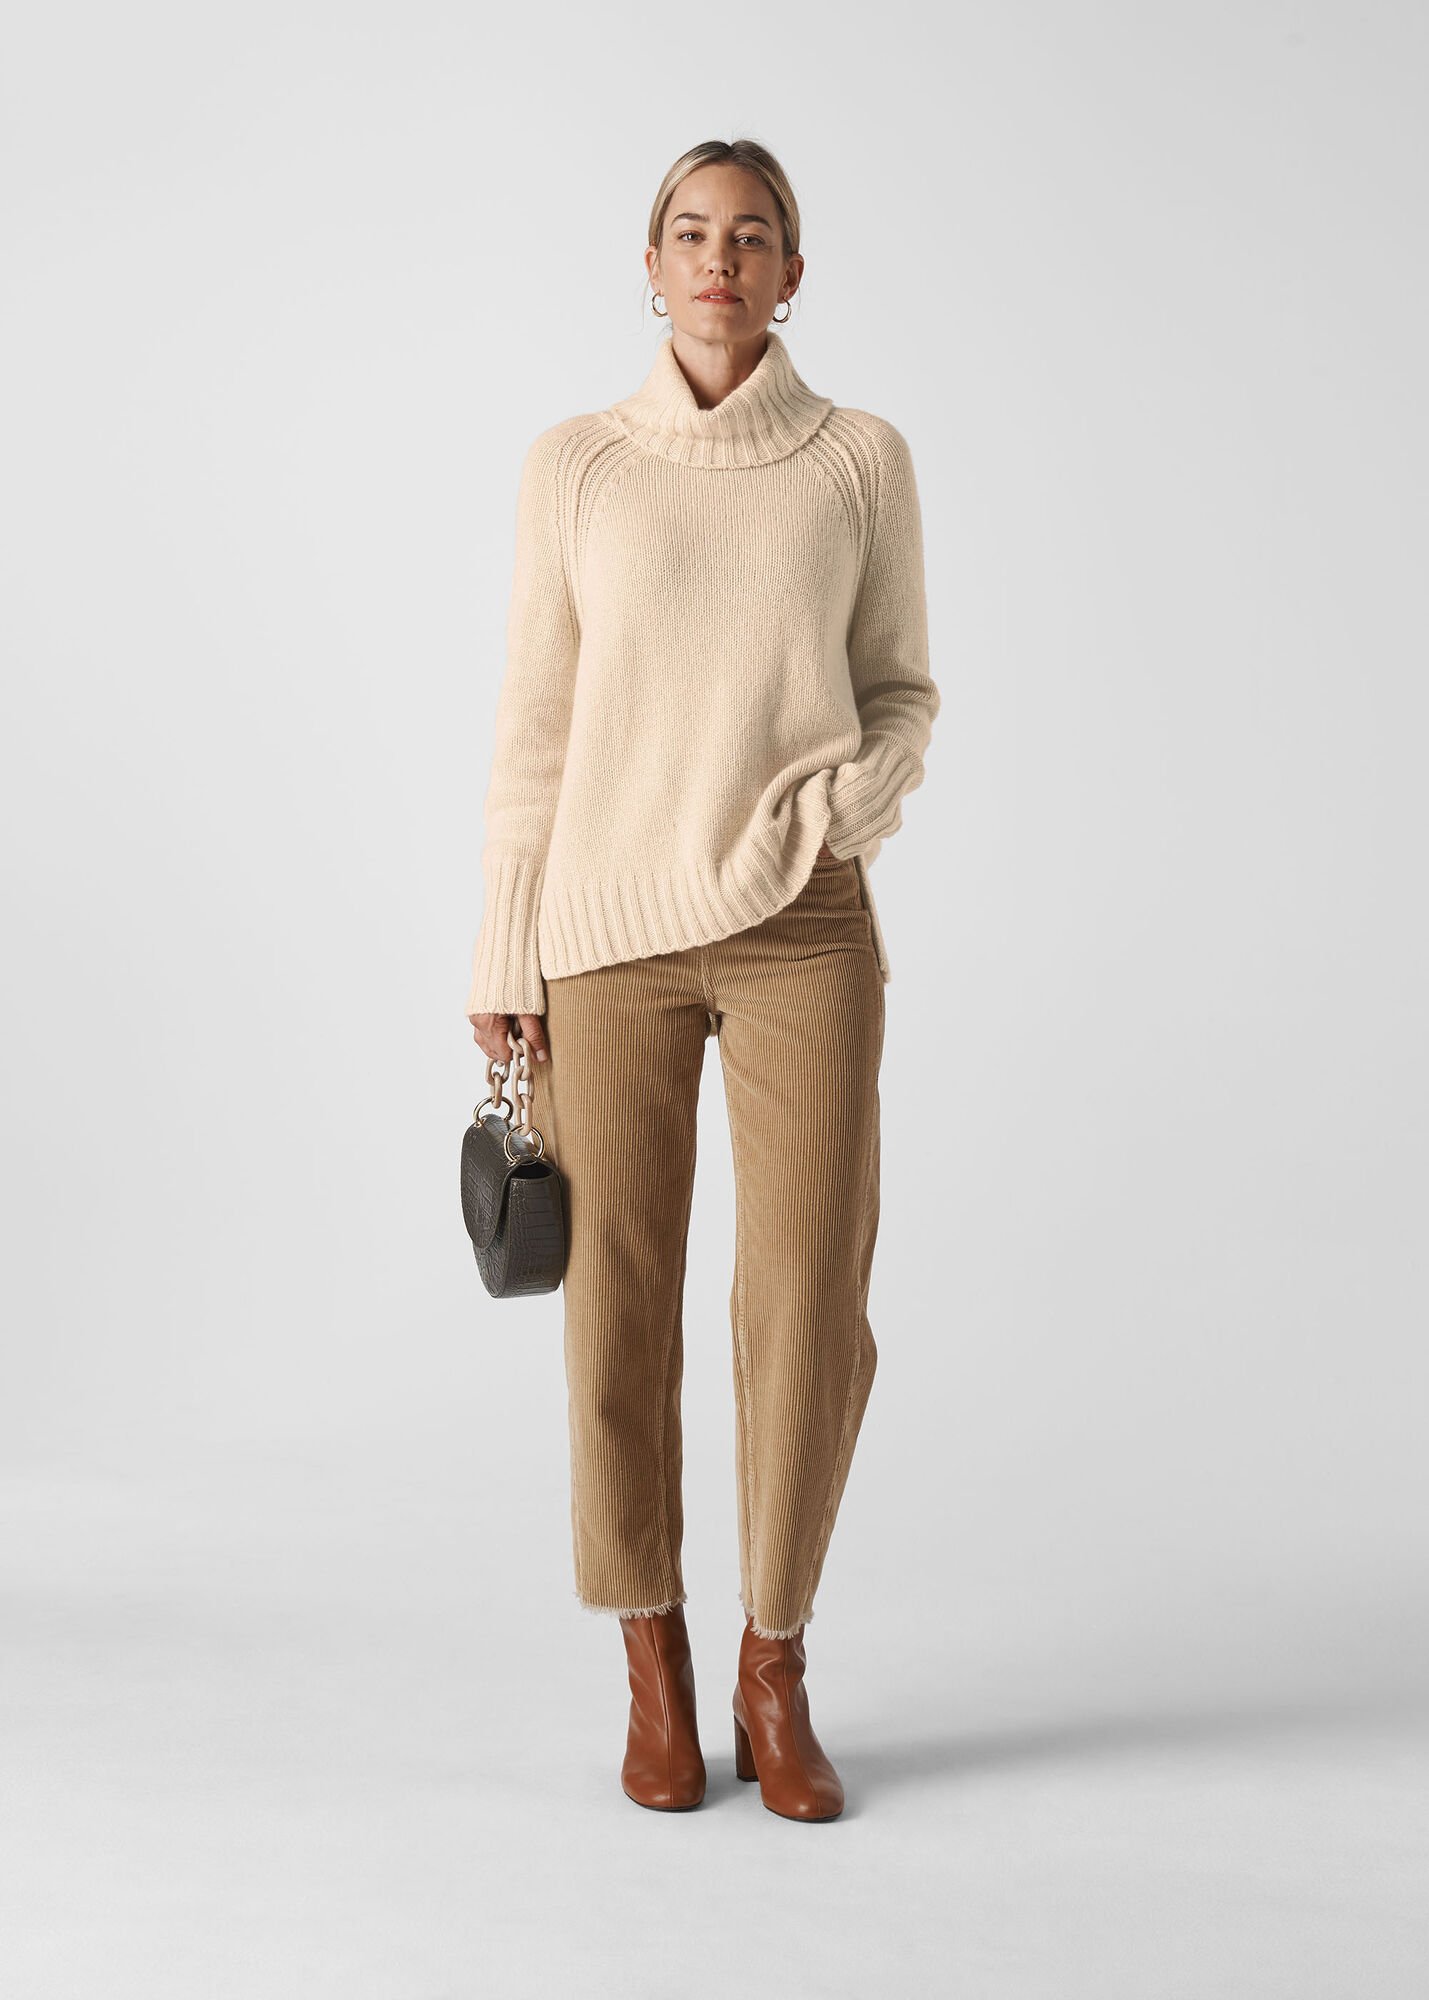 Ivory Chunky Cashmere Knit | WHISTLES